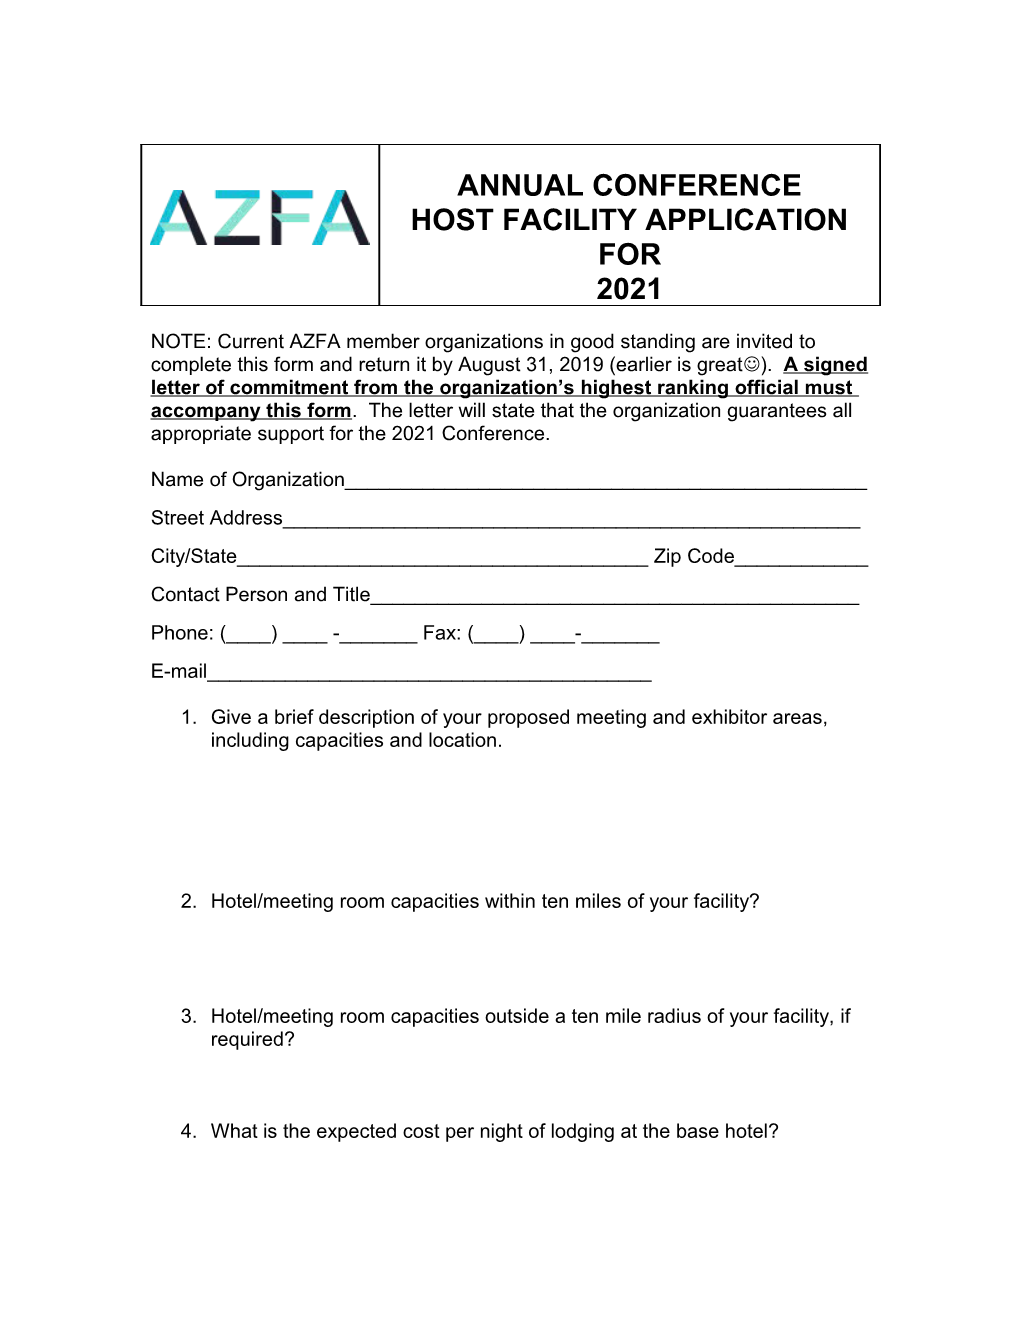 NOTE: Current AZFA Member Organizations in Good Standing Are Invited to Complete This Form s1